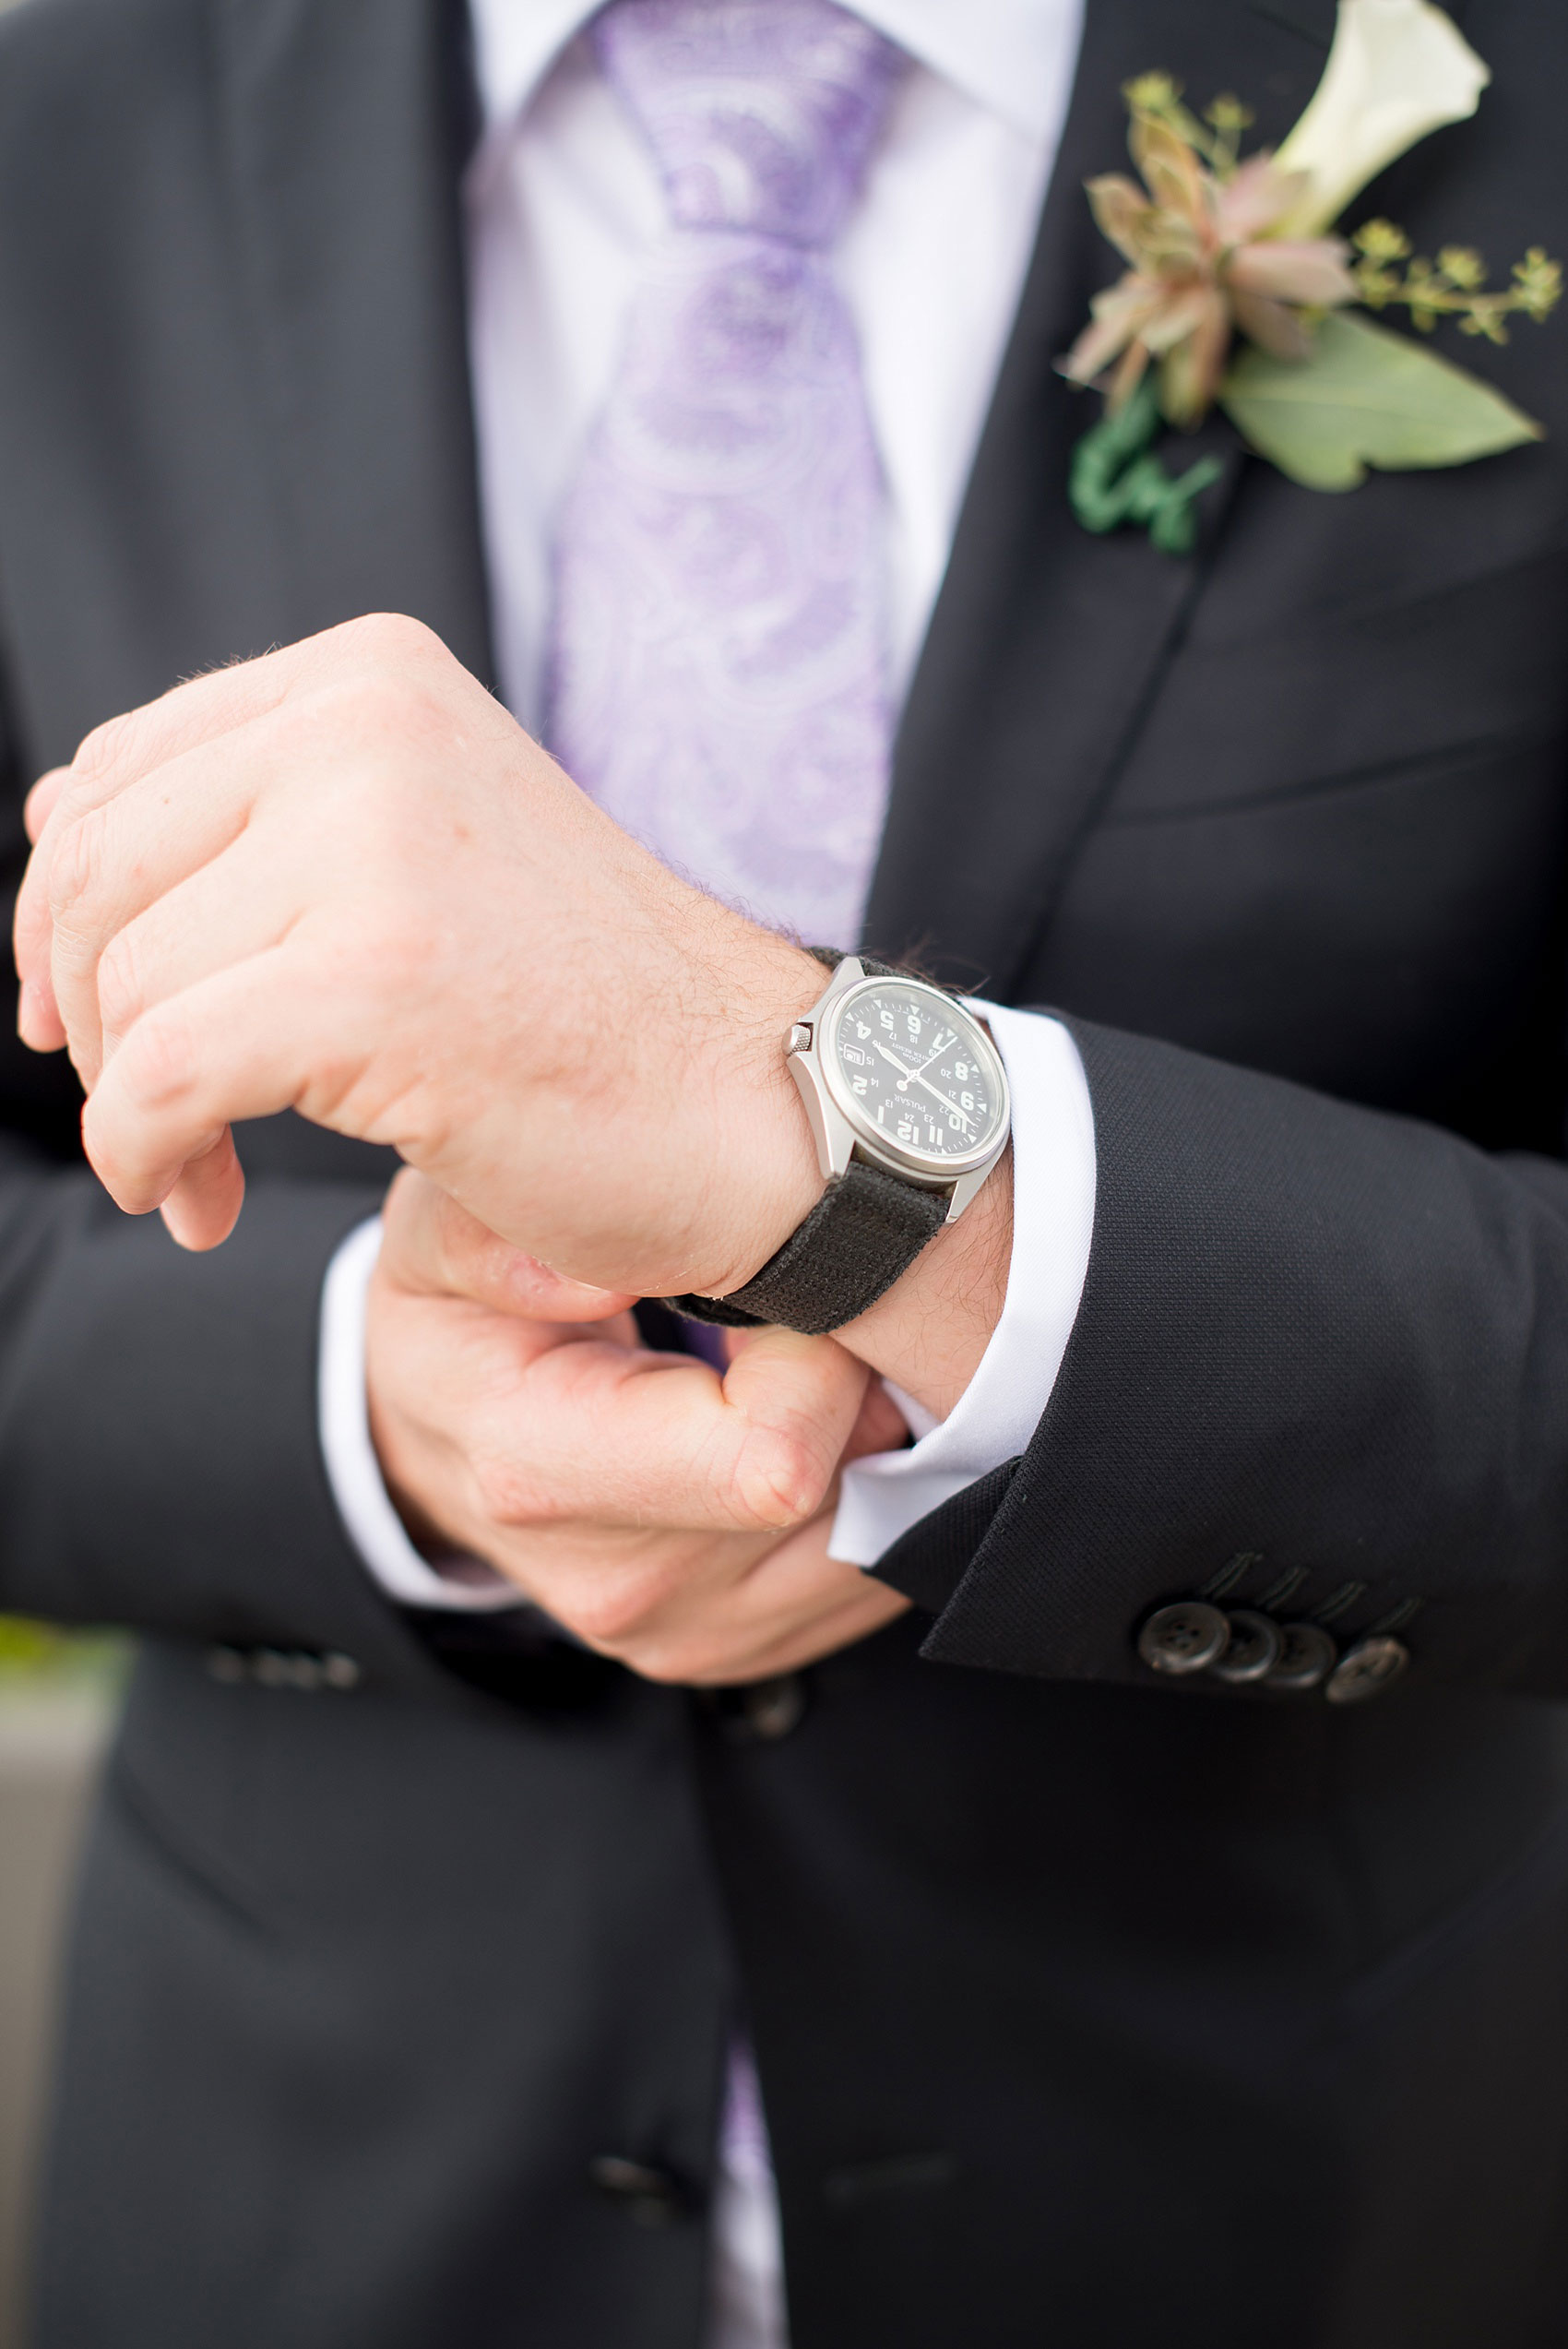 Mikkel Paige Photography photos of a NYC wedding at Tribeca Rooftop. Watch the groom received from his parents for his 25th birthday that he wore for his ceremony.